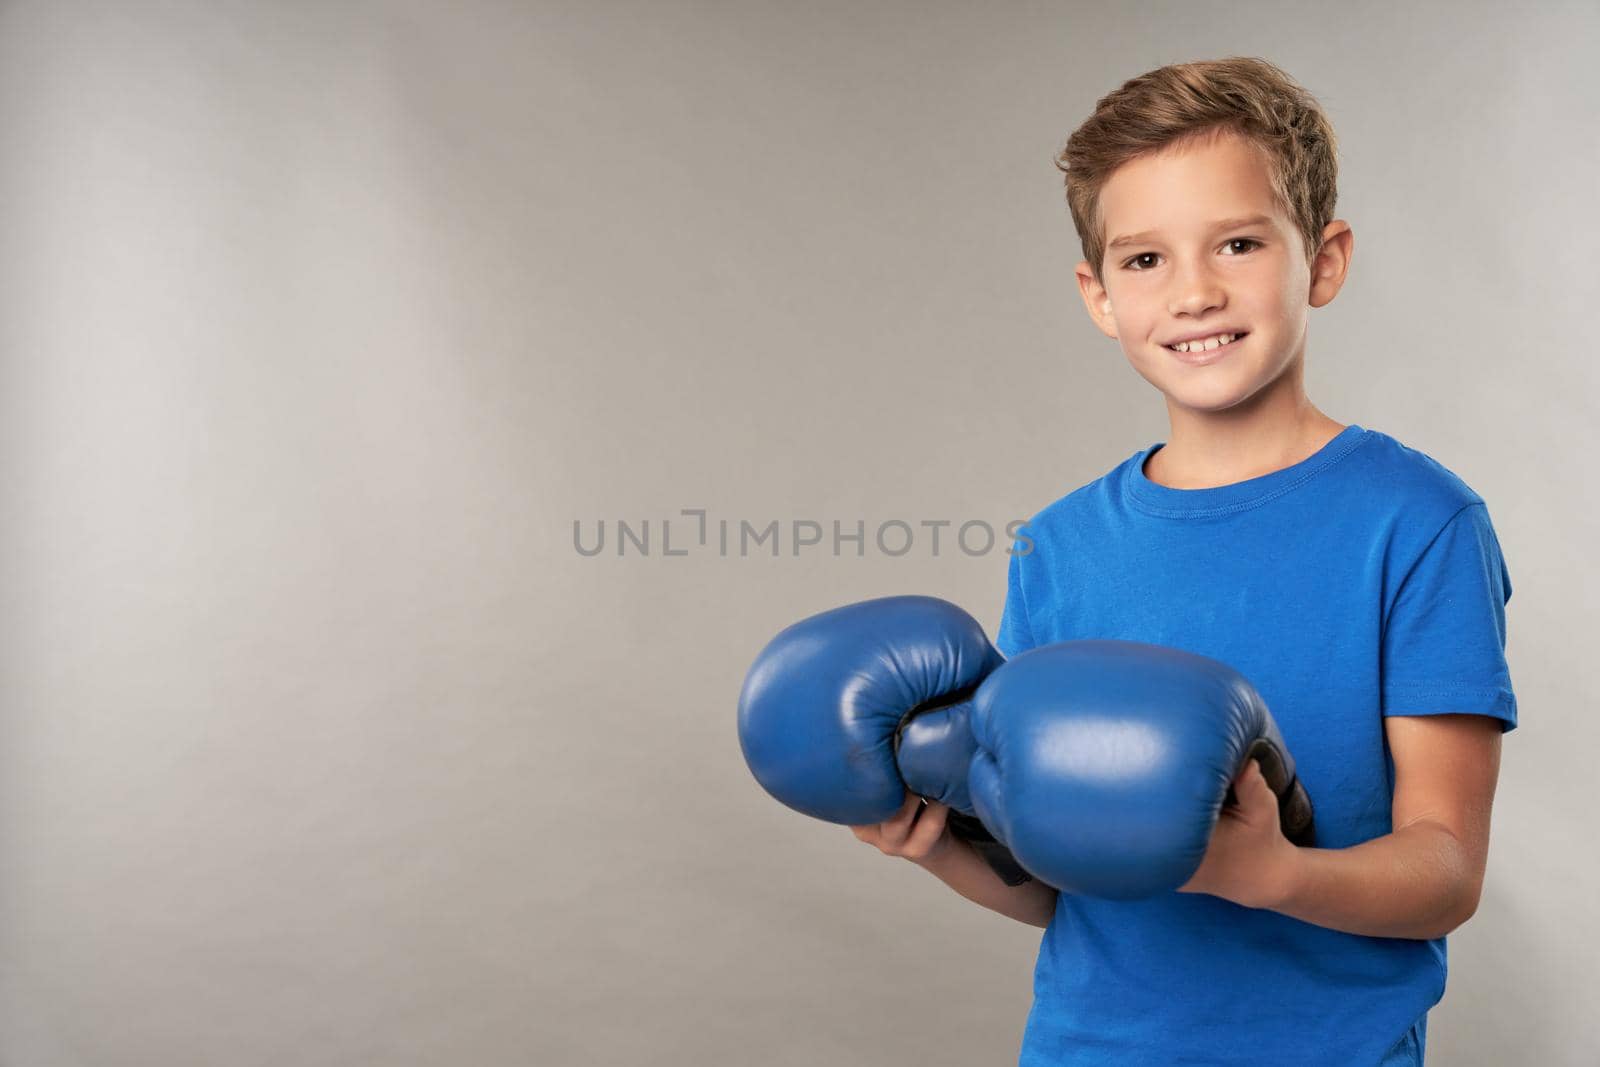 Joyful boy with boxing gloves standing against gray background by friendsstock